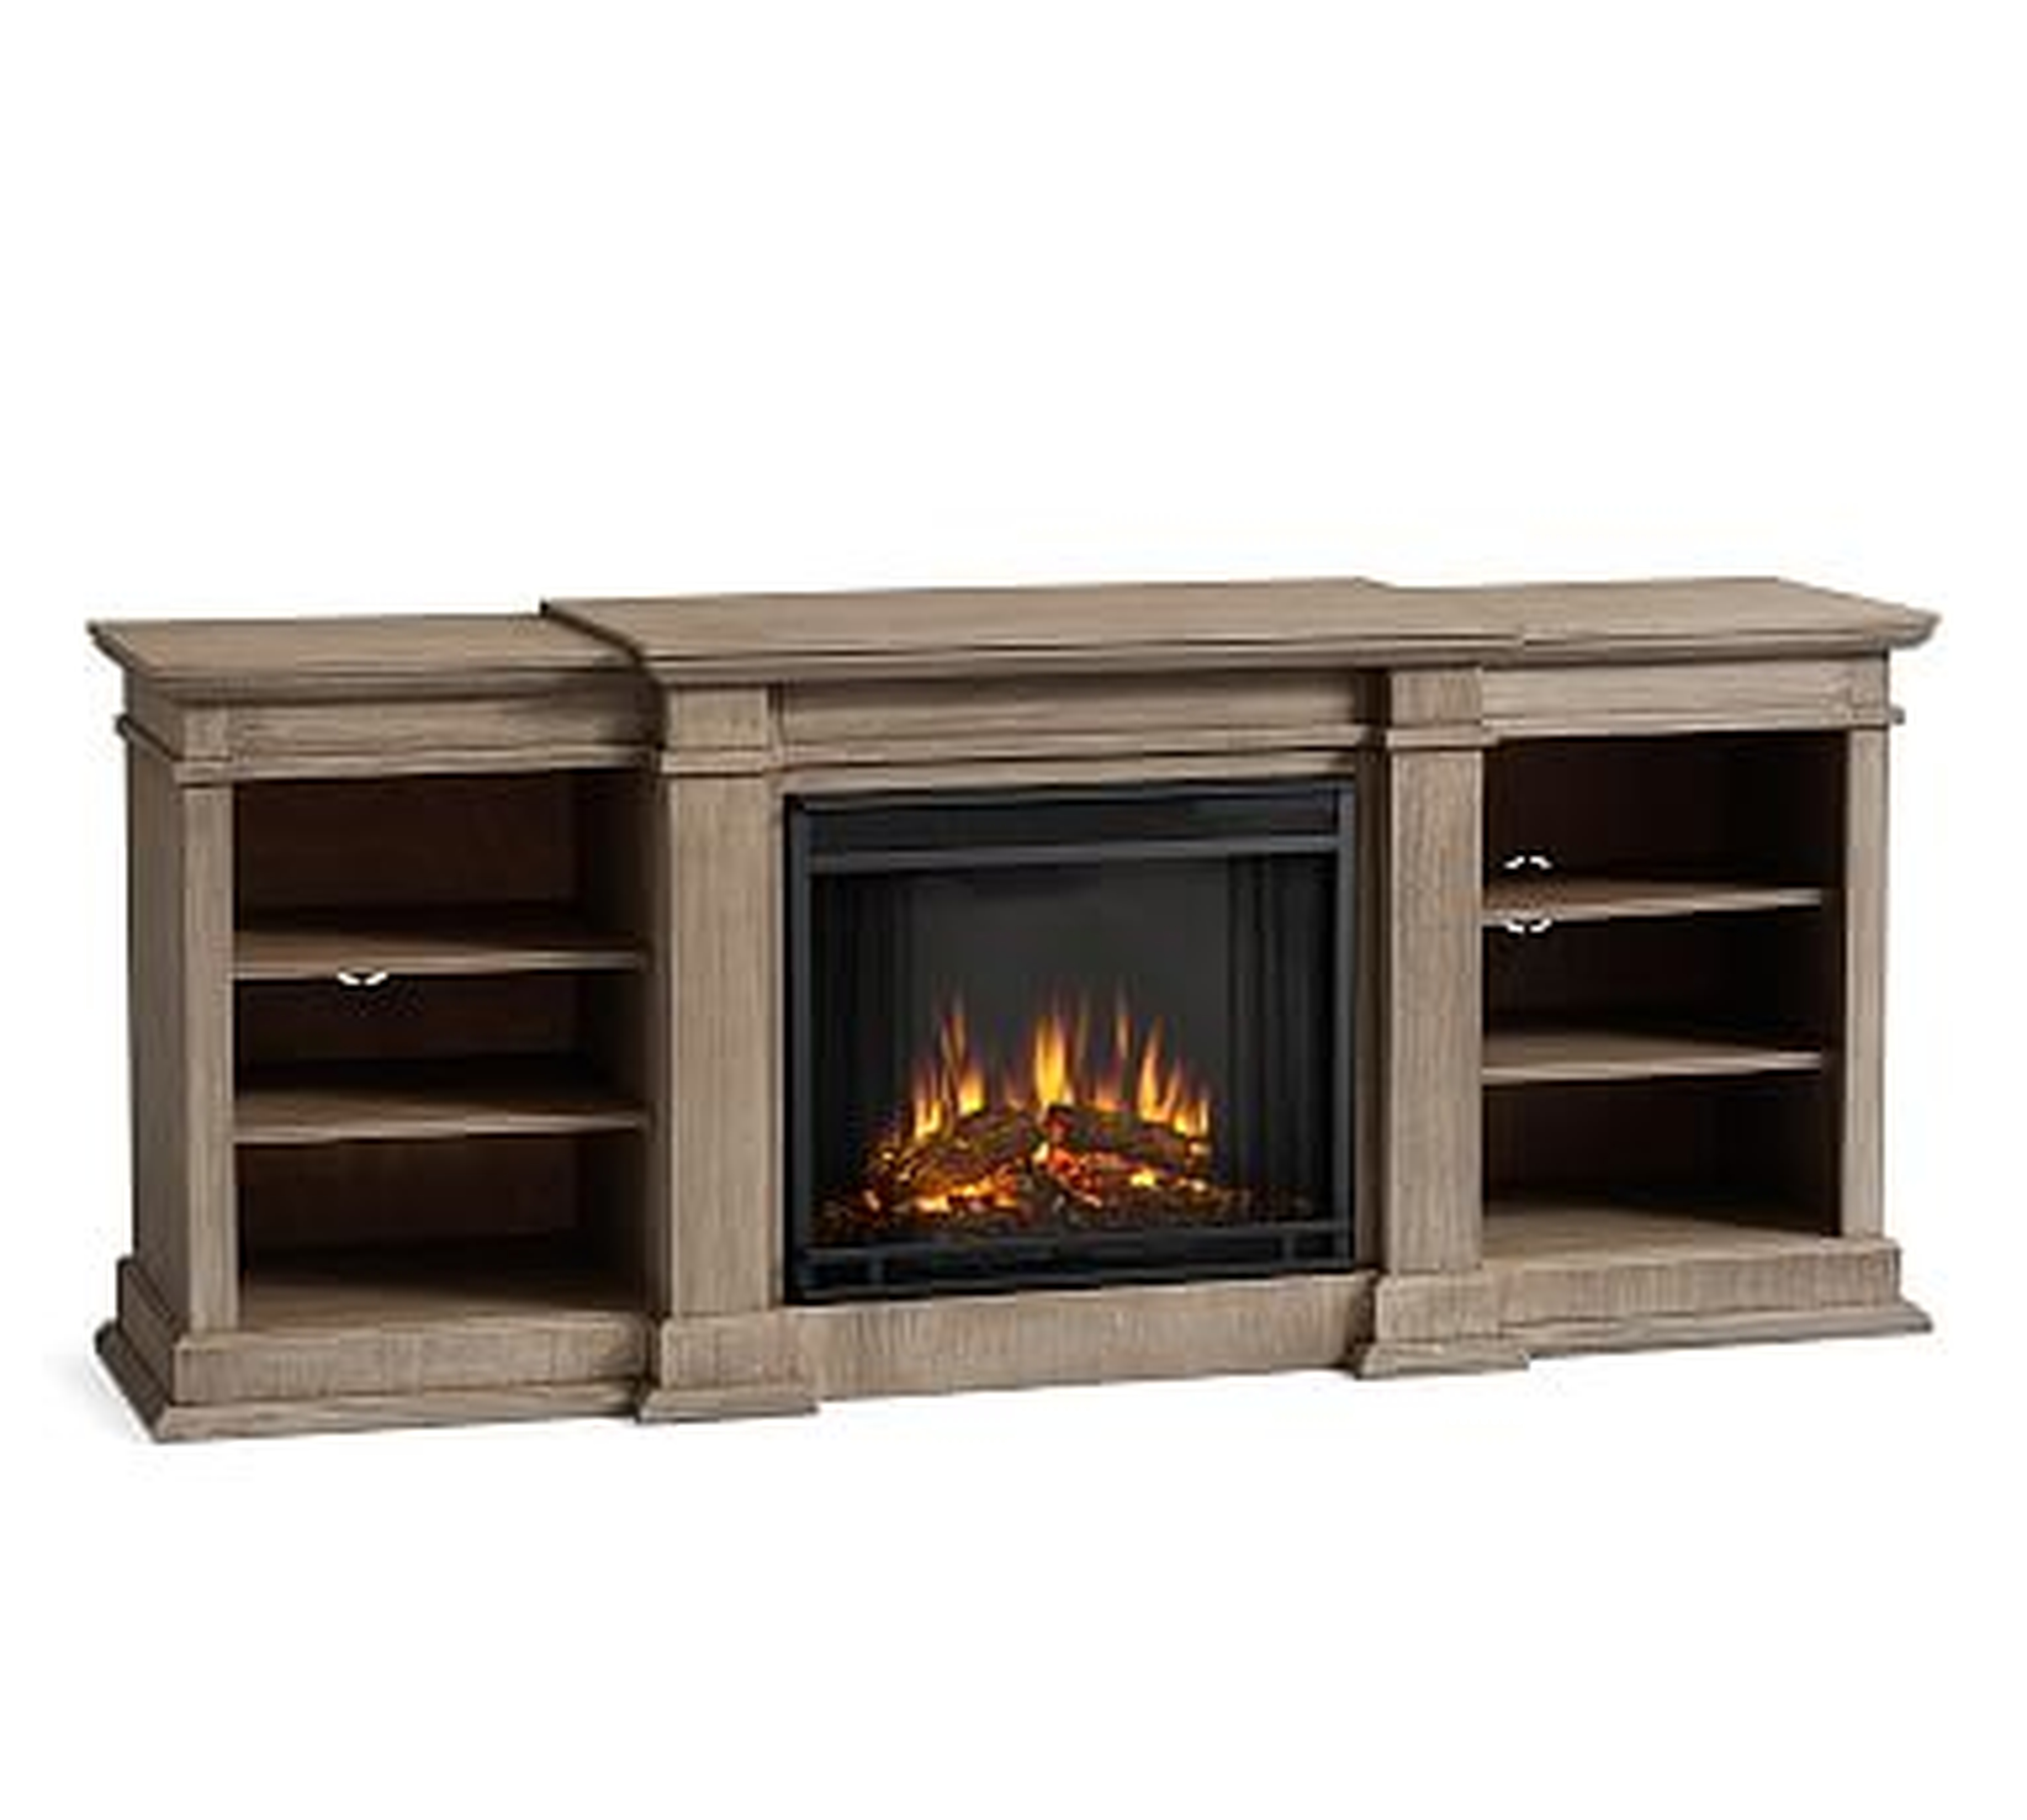 Lorraine Electric Fireplace, Gray Wash - Pottery Barn